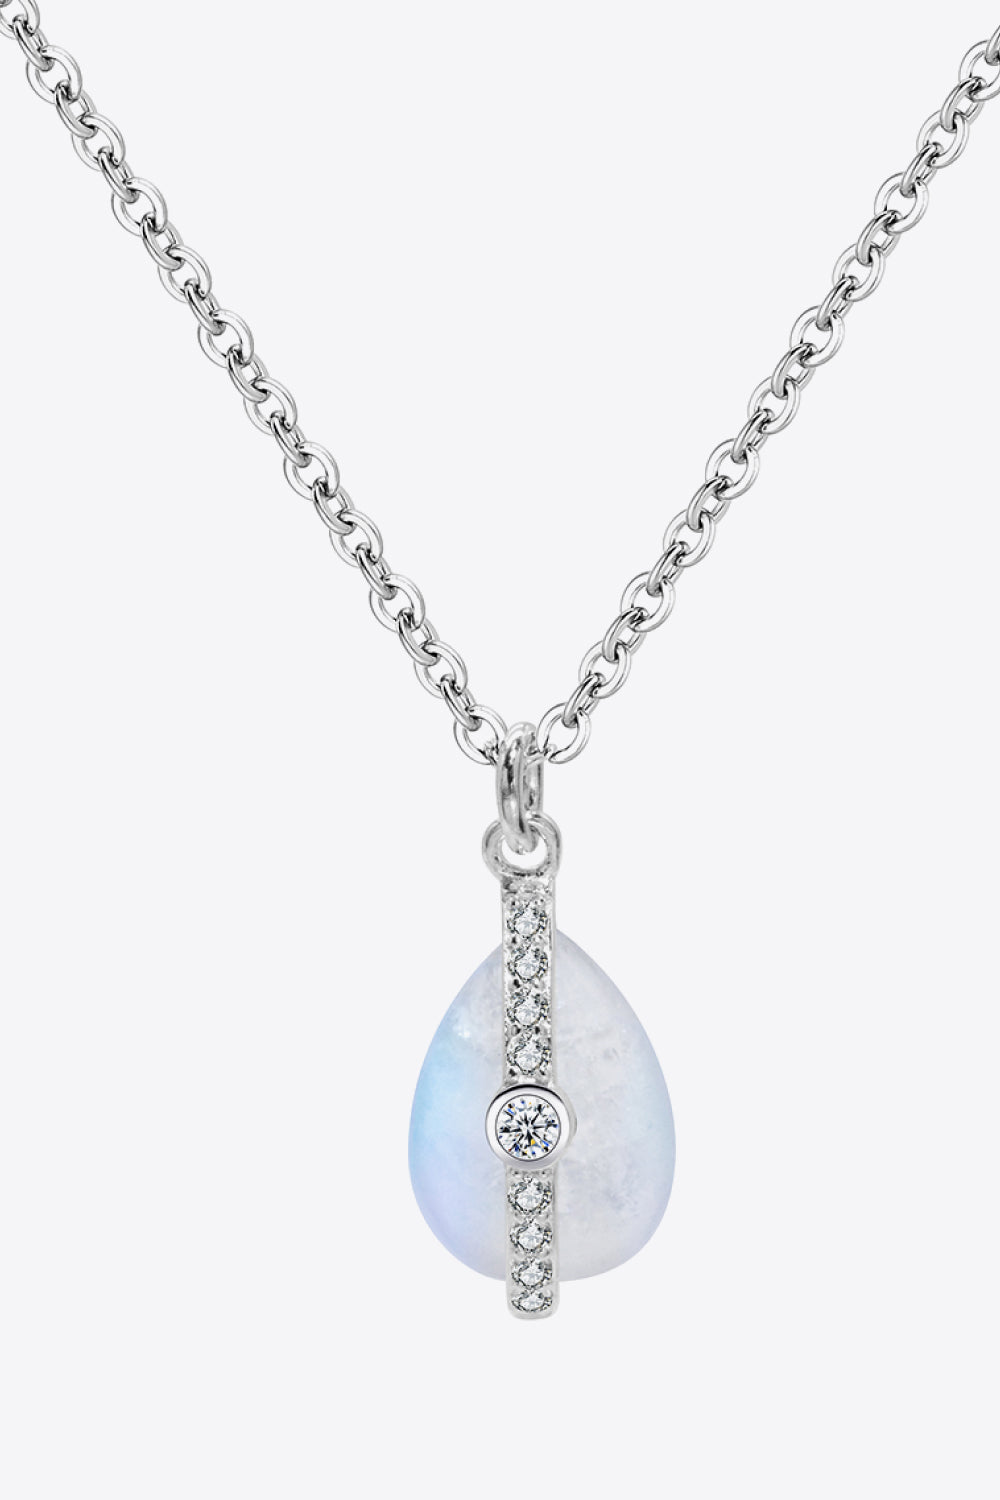 Zircon Pendant Necklace: A necklace featuring a pendant adorned with zircon gemstones, adding a touch of sparkle and elegance to your jewelry collection.